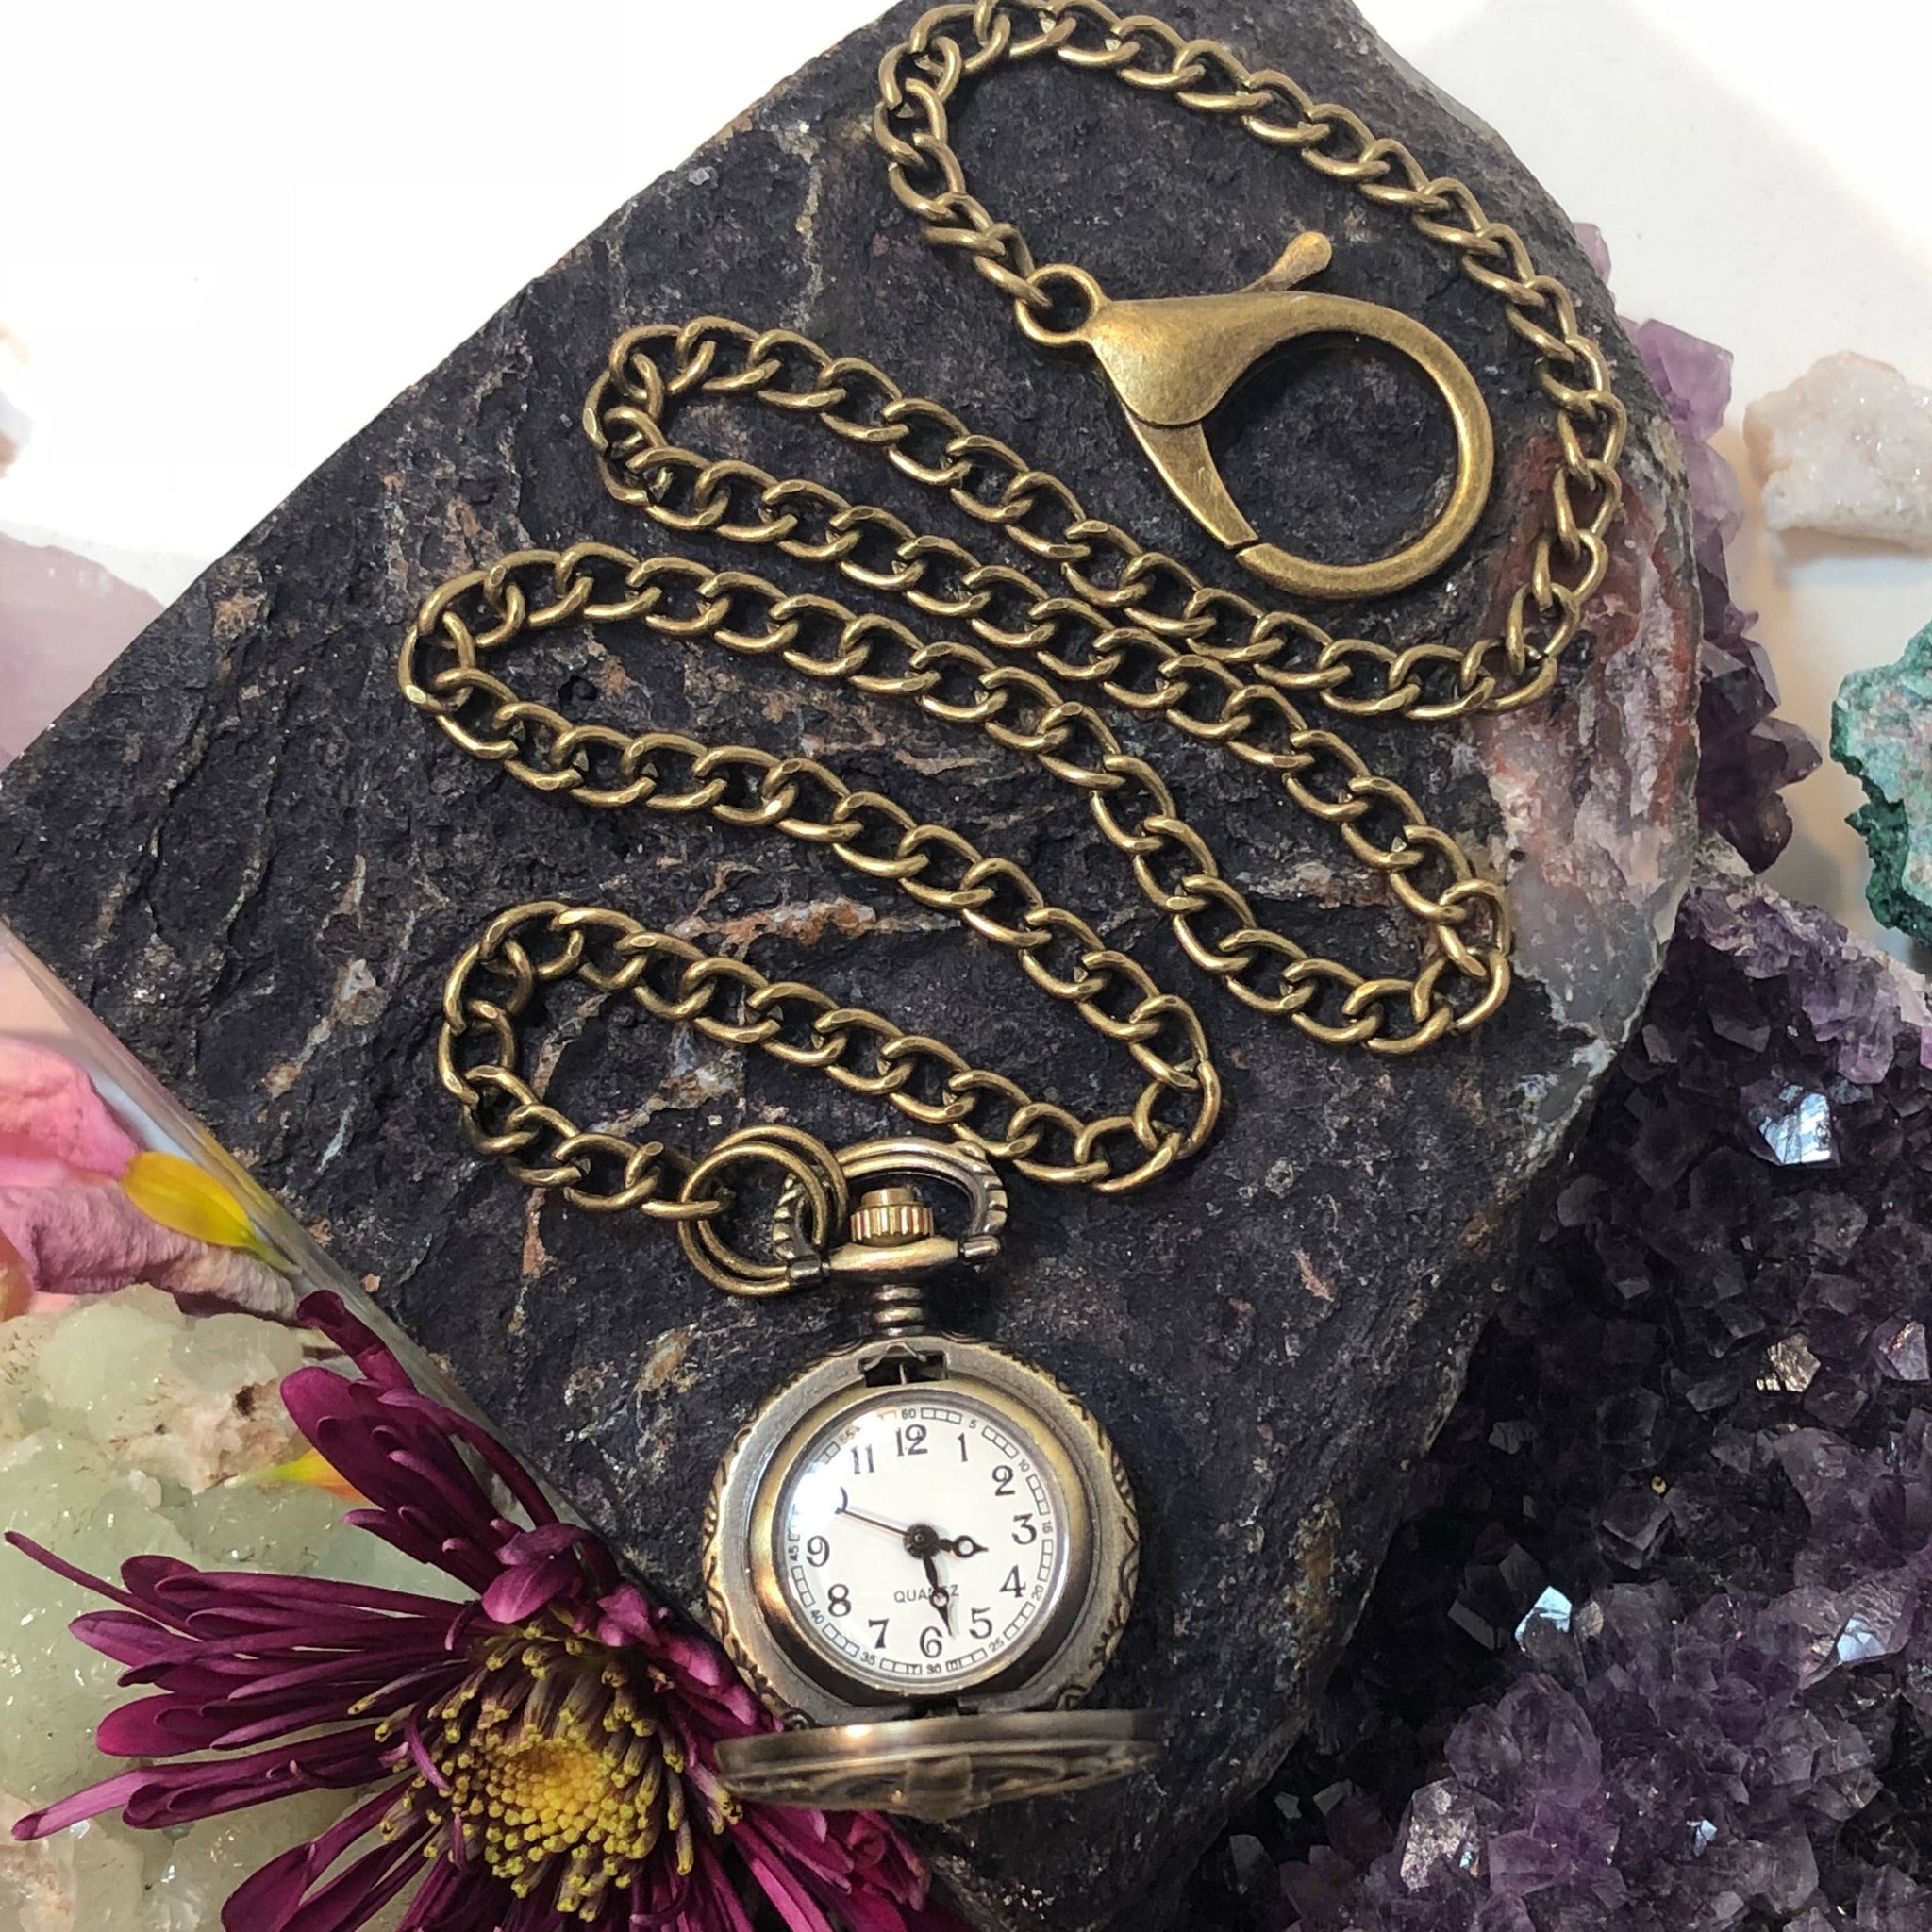 Rose Pocket Watch Steampunk PocketWatch Cosplay FREE Gift Box -  AlphaVariable